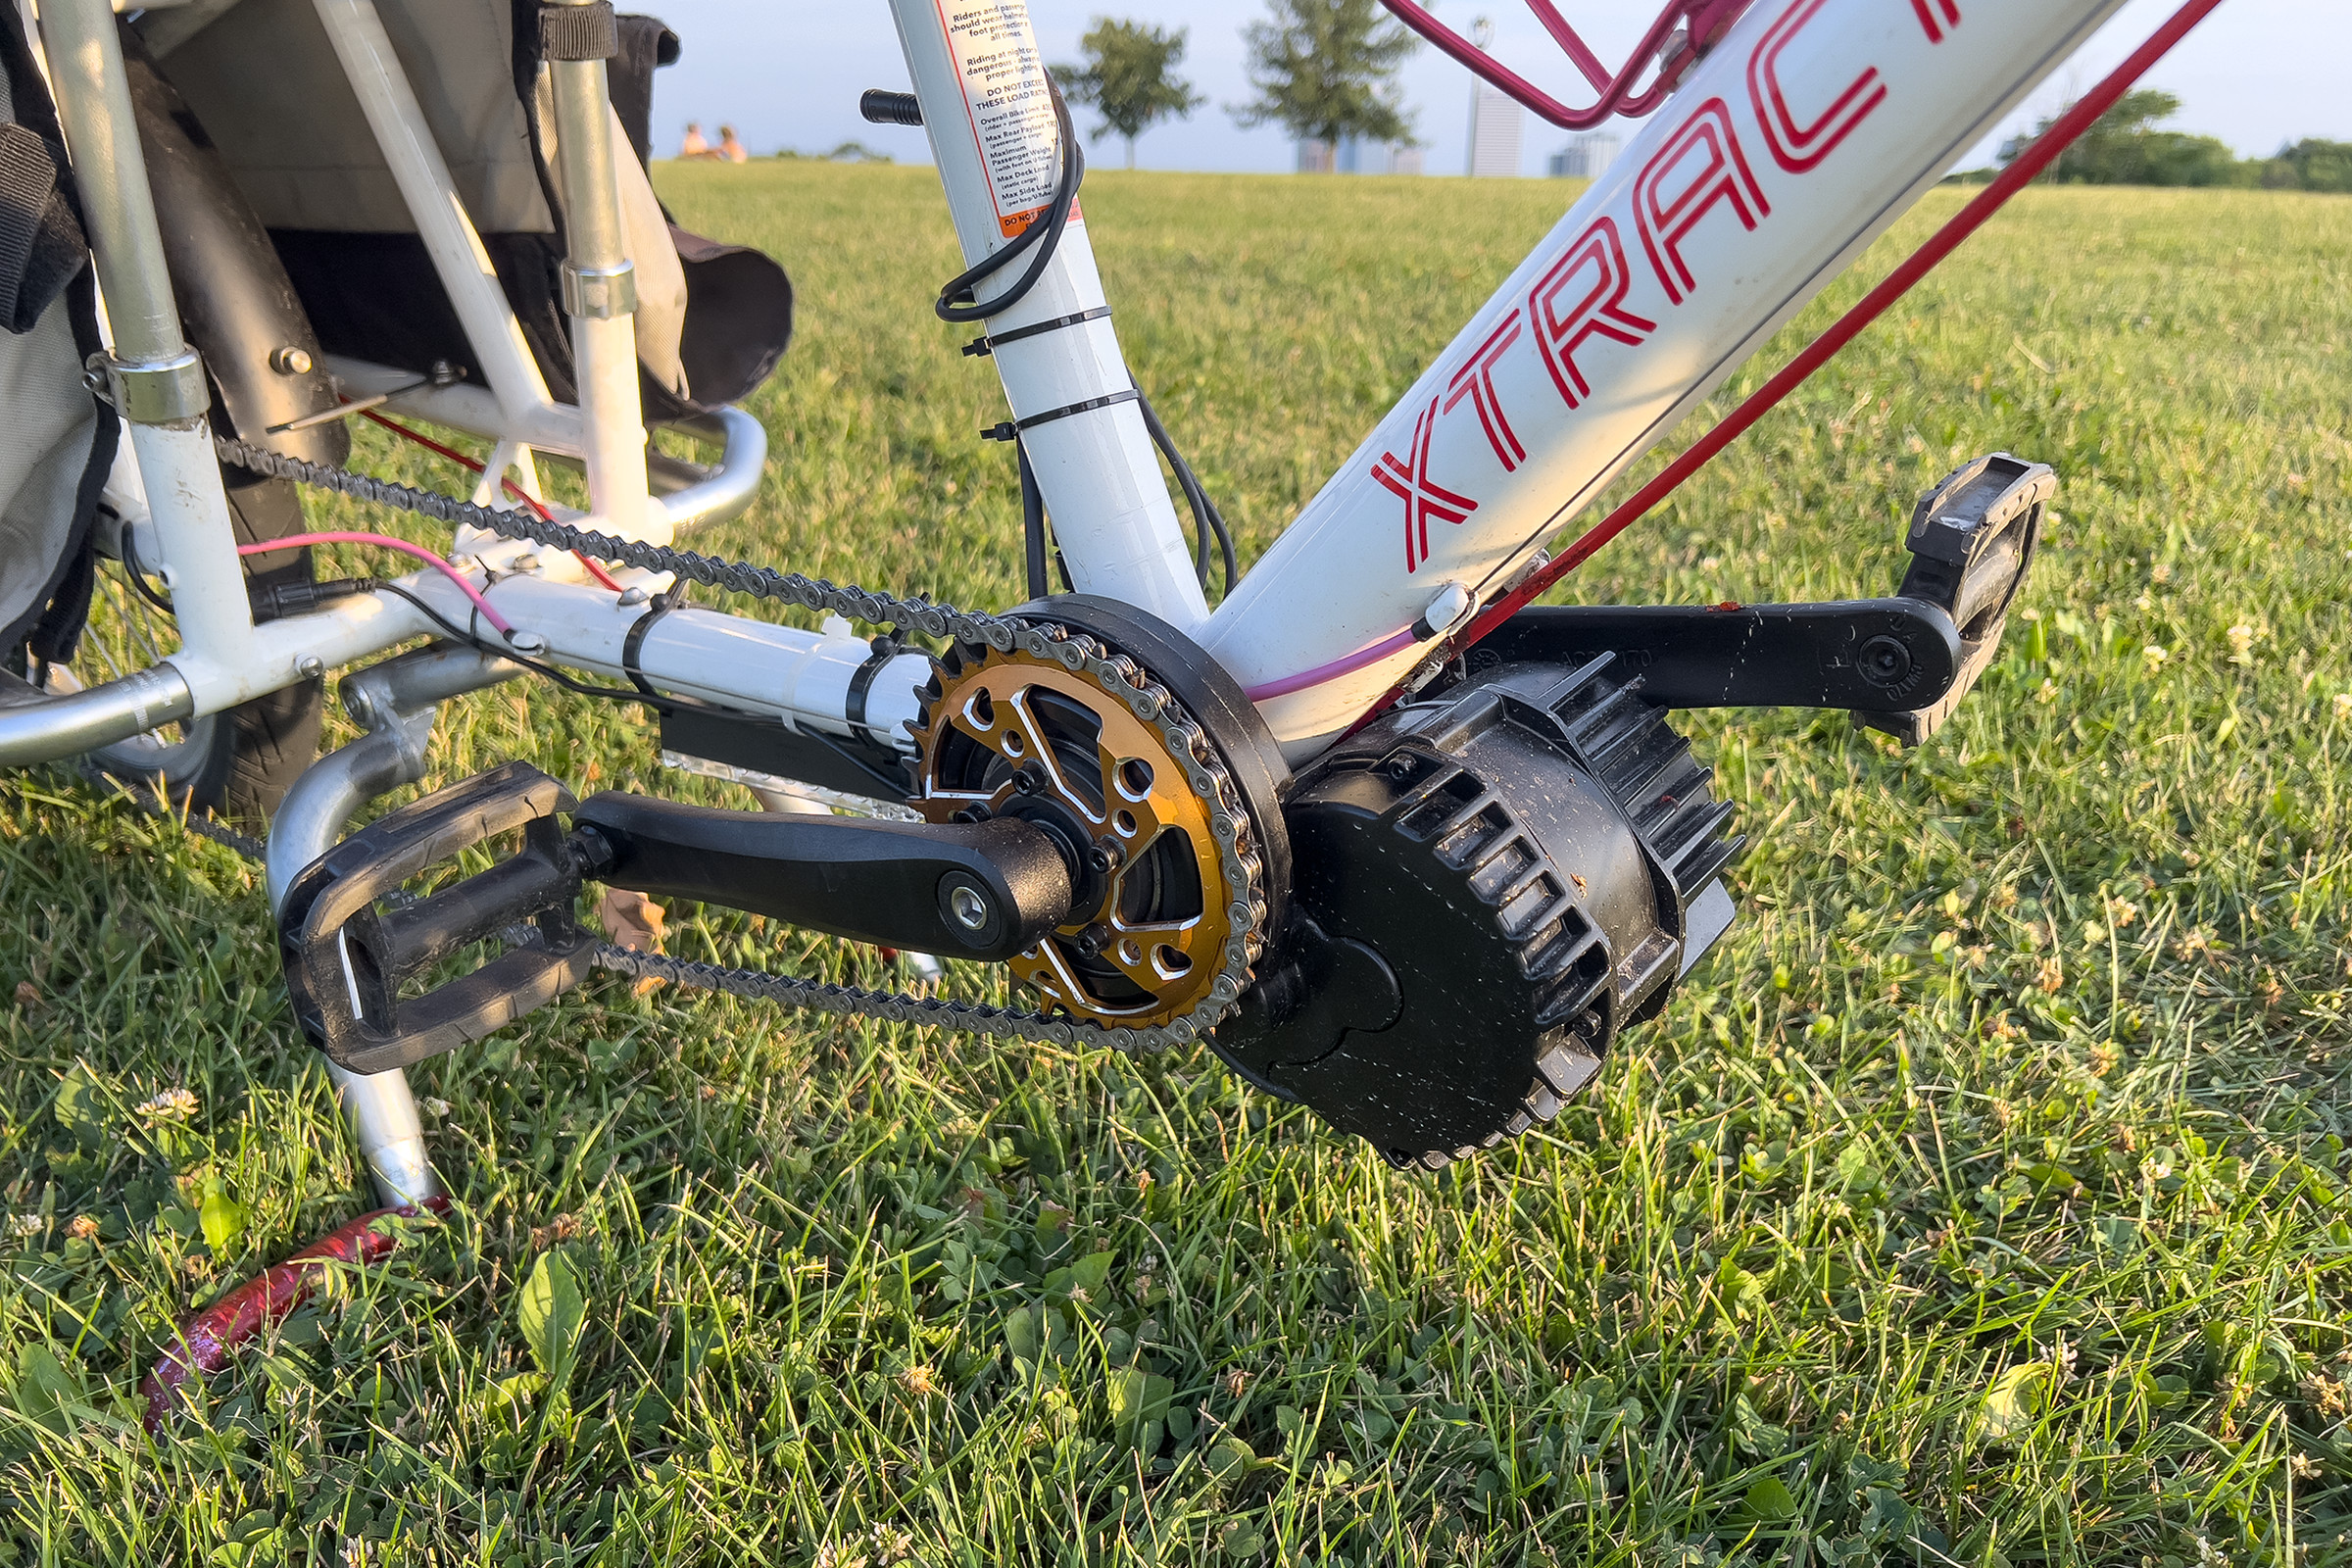 A close-up of the bike’s bottom bracket section after it was finished. It has the e-bike motor, new chainring, and new chain installed. It is sitting in a grassy field at sunset.